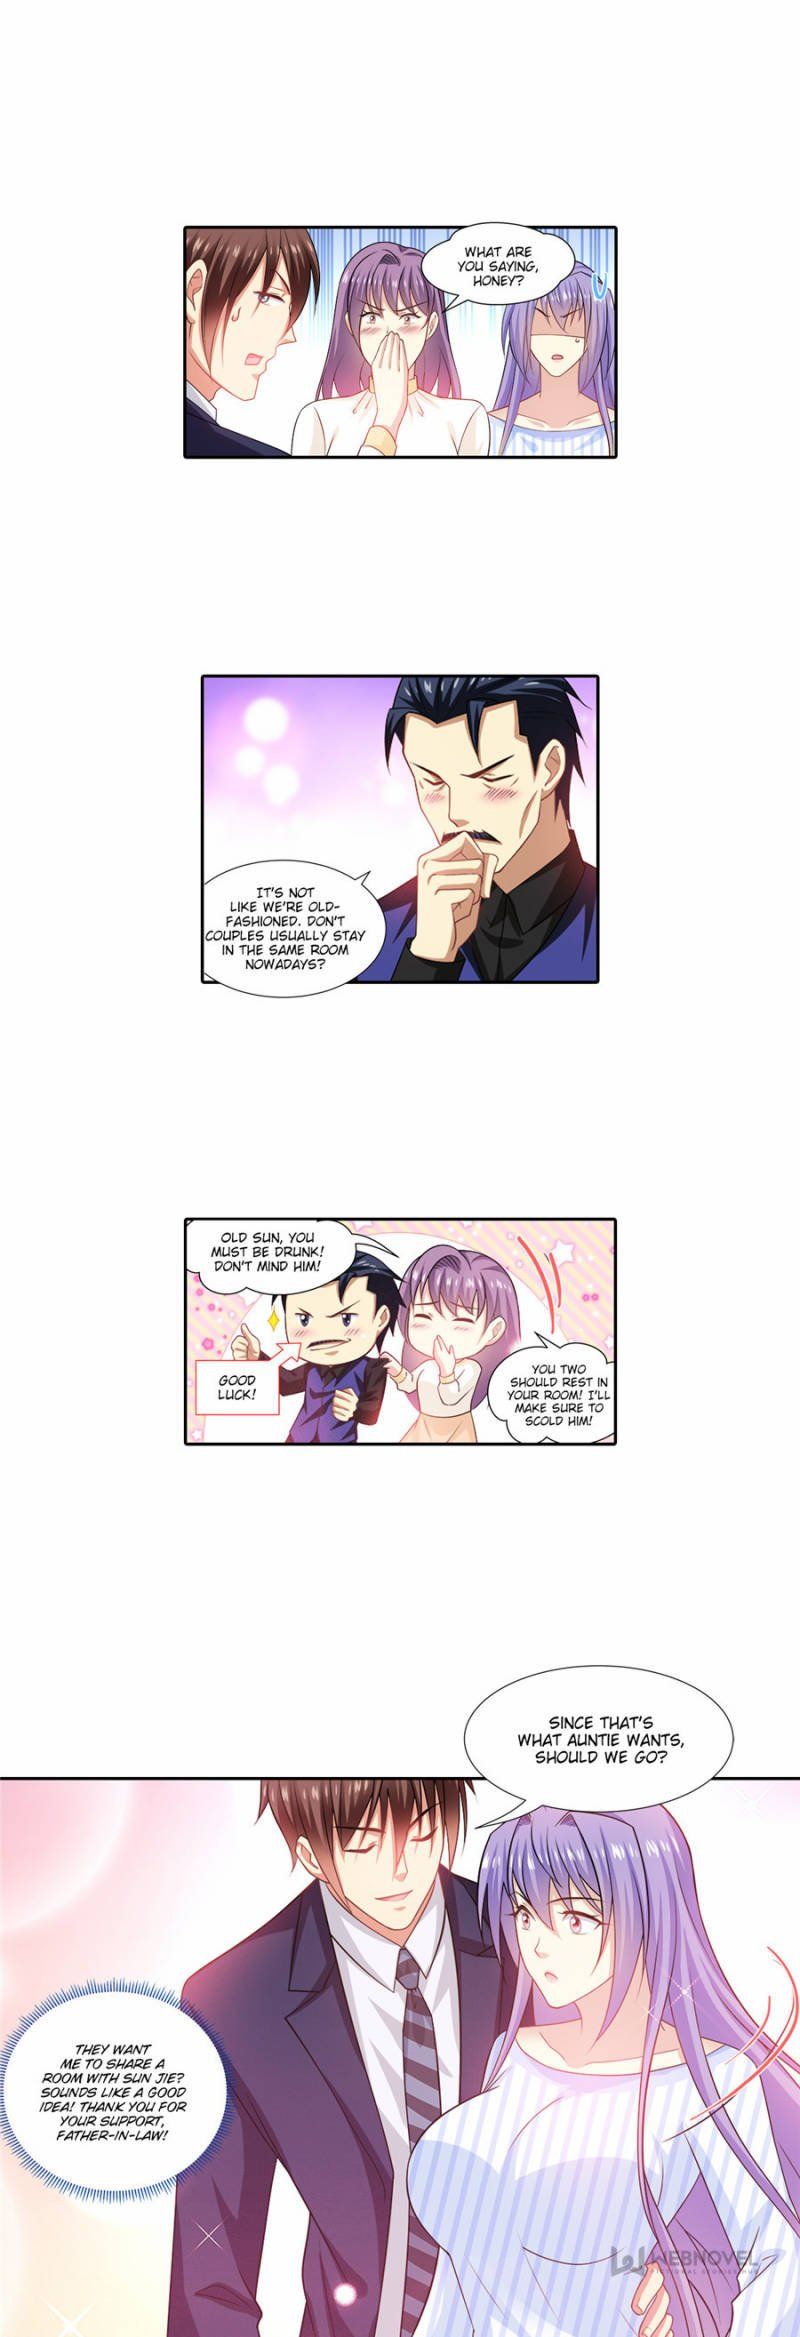 So Pure, So Flirtatious ( Very Pure ) Chapter 298 page 7